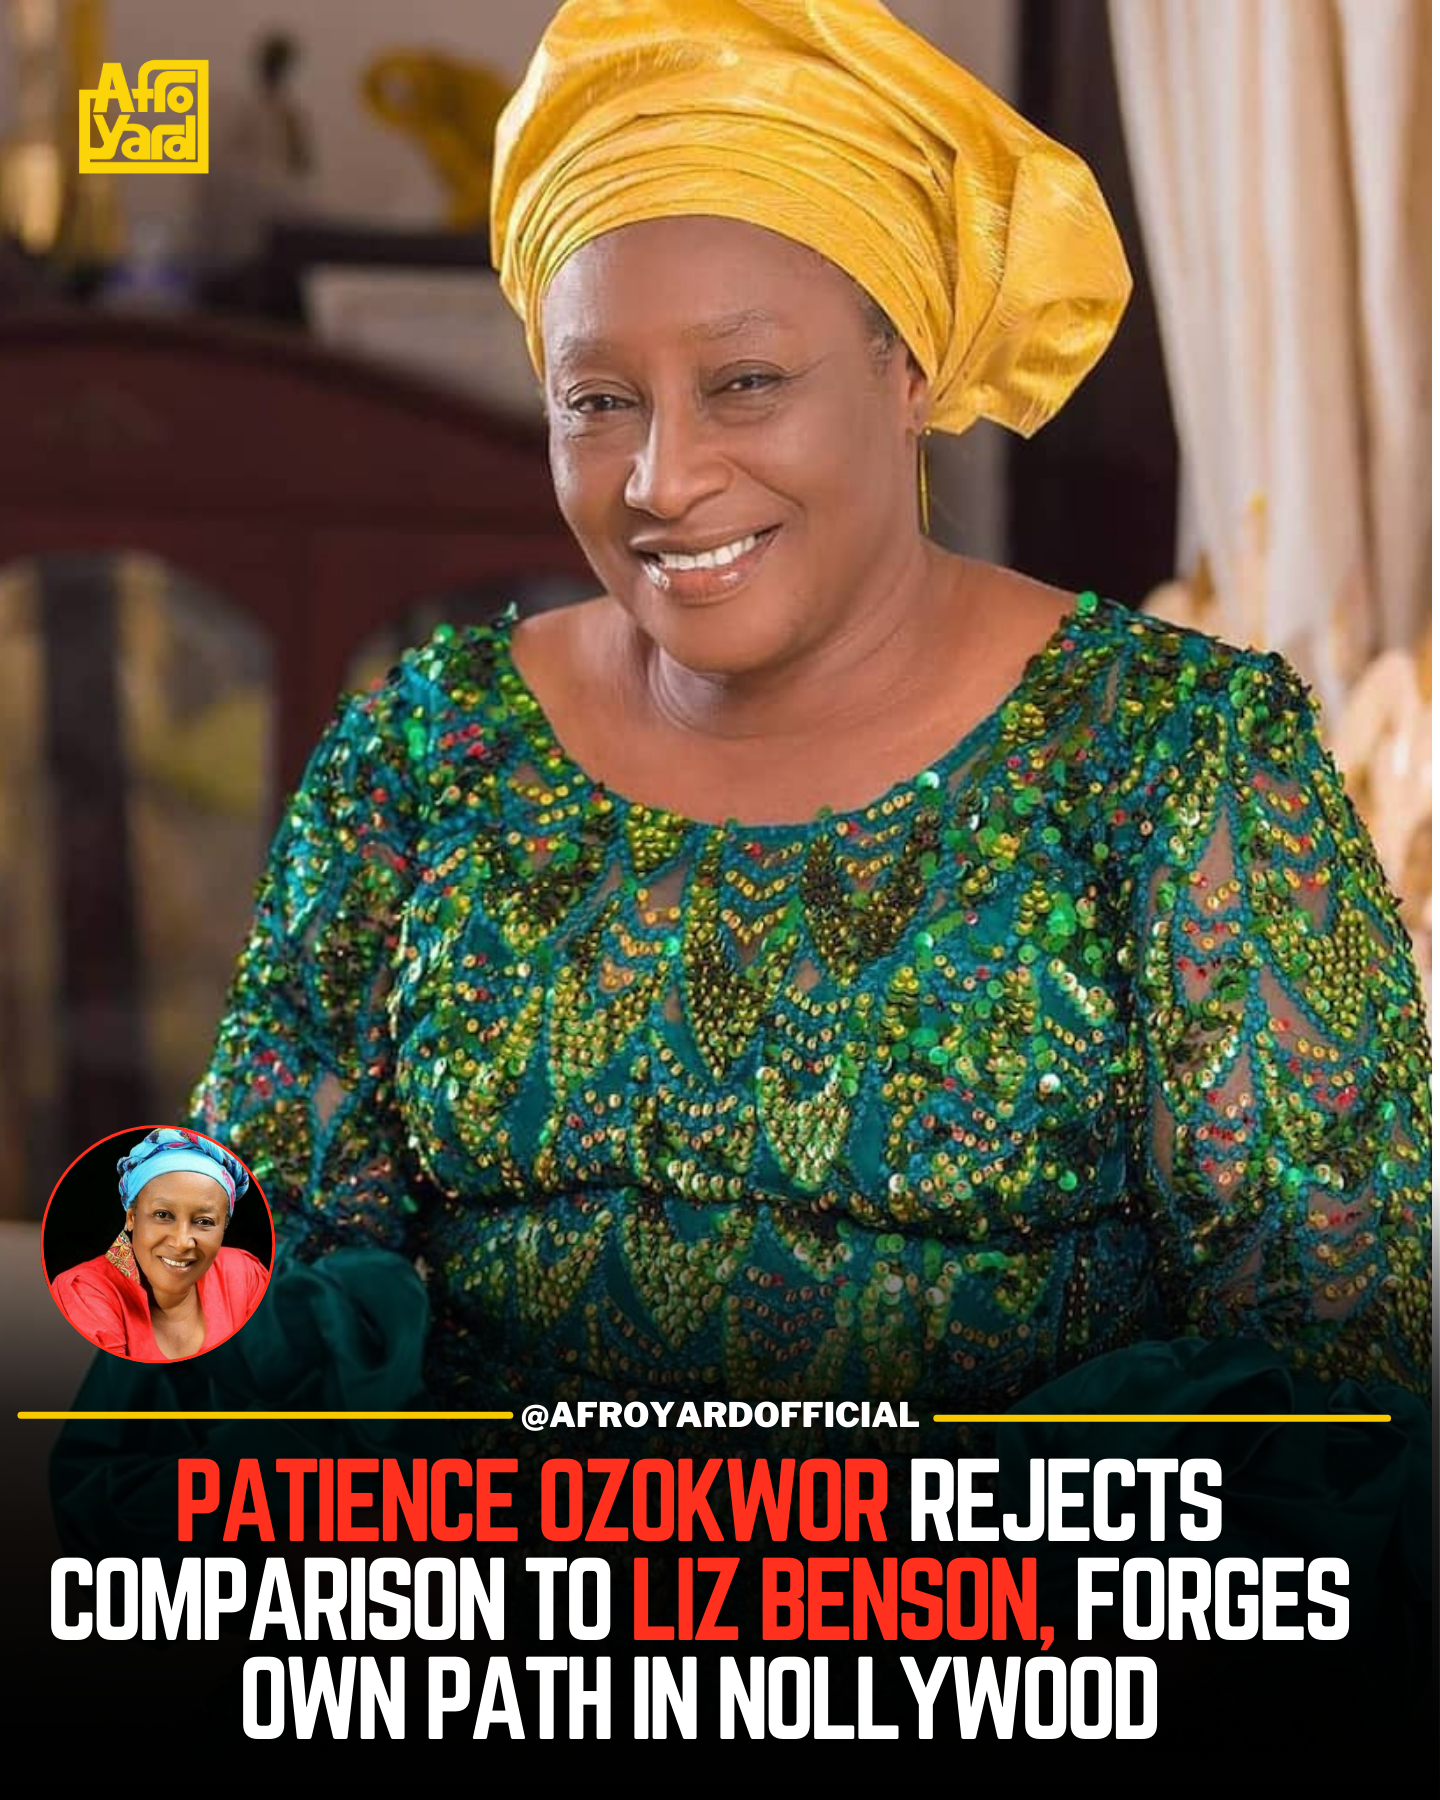 Patience Ozokwor Rejects Comparison to Liz Benson, Forges Own Path in Nollywood